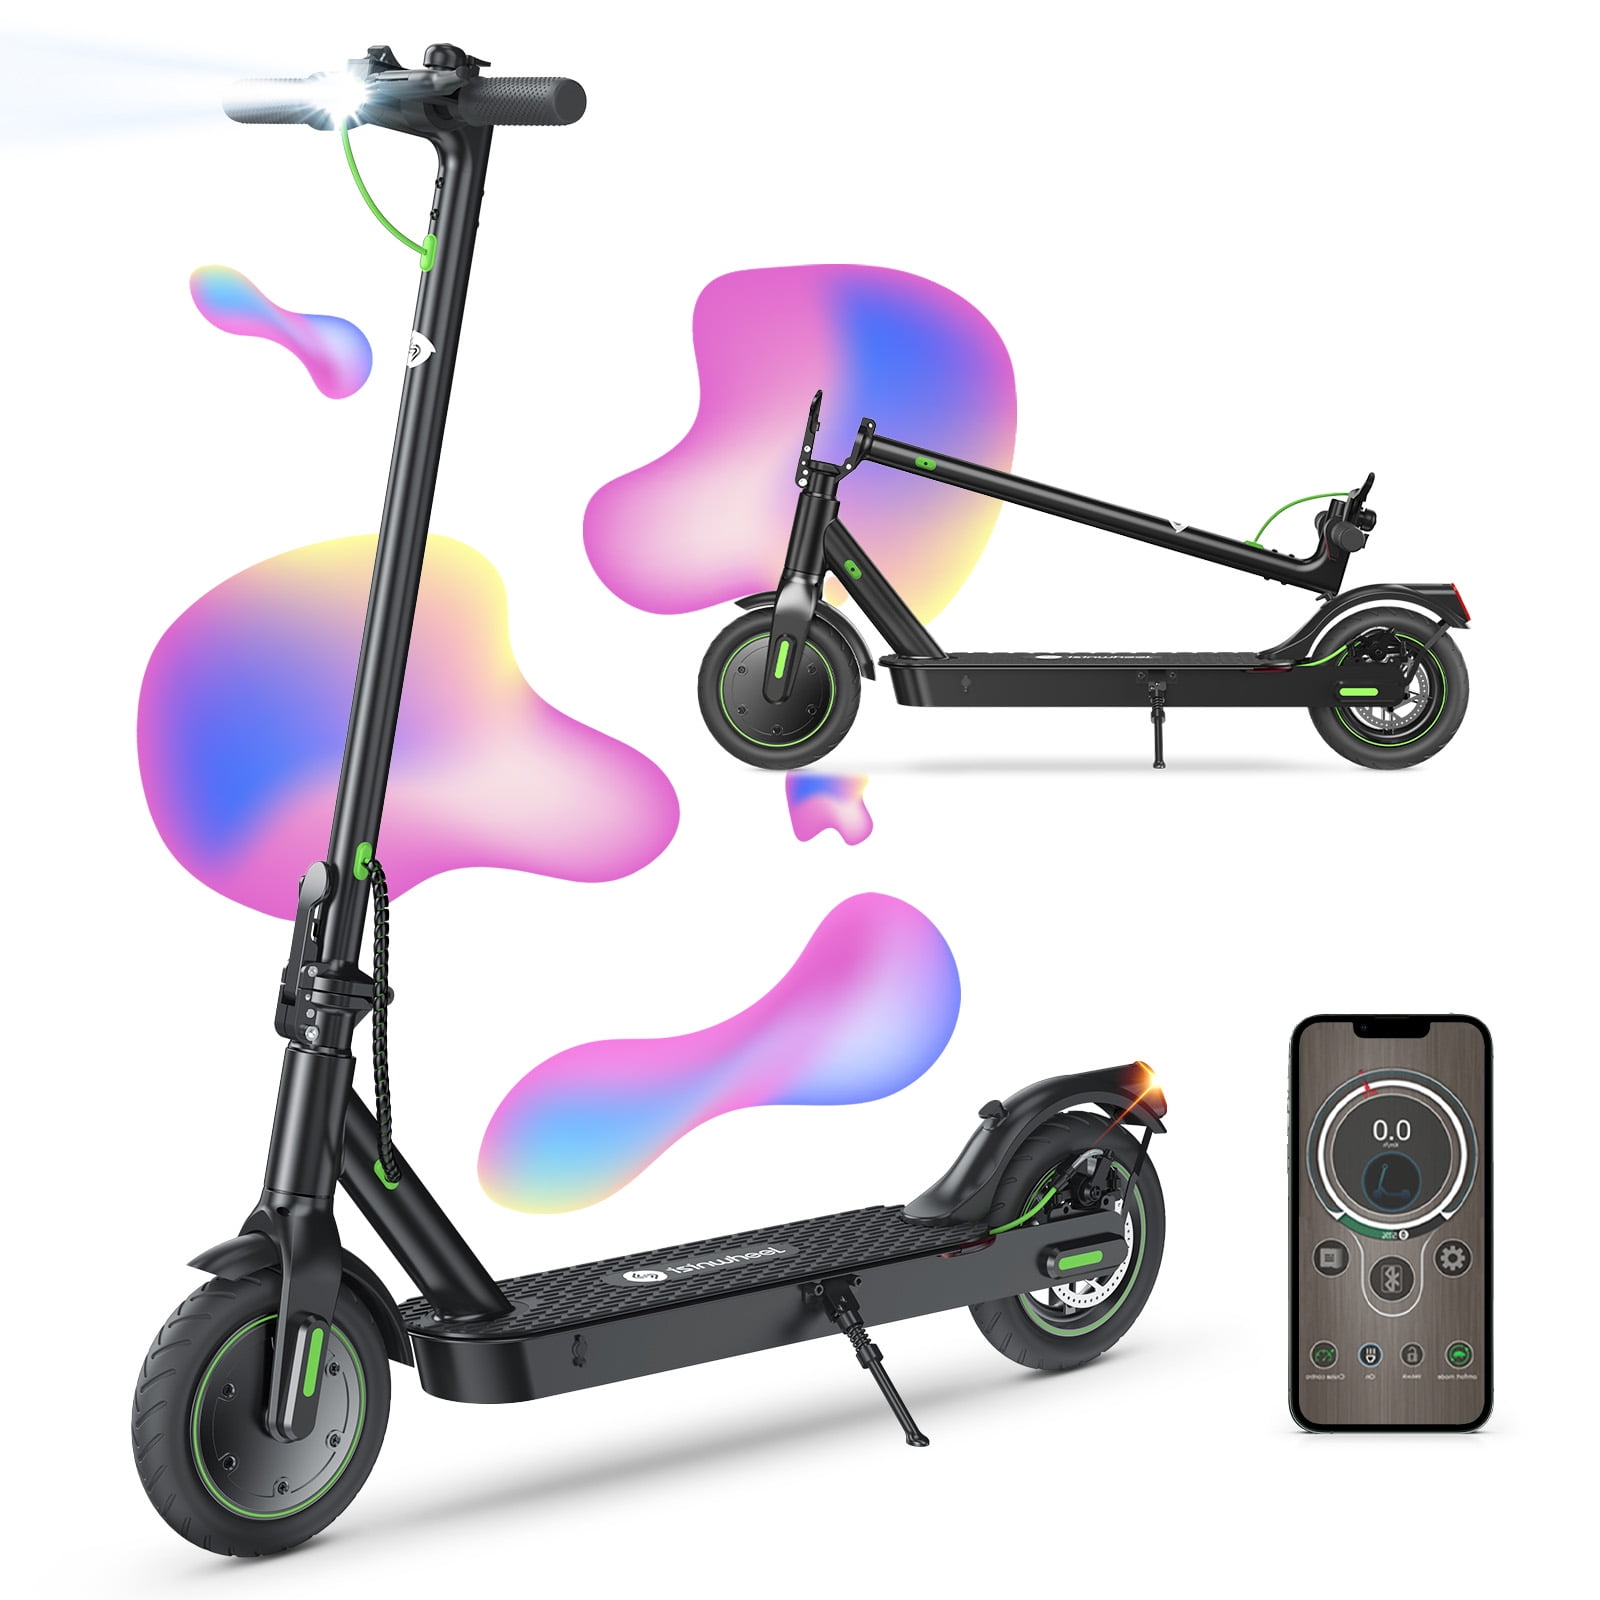 Up 8.5-inch Adult Electric Scooter, MPH, Inflatable Motor 350W Control, Electric E Battery Long App Miles Range, Tires, S9Pro To Scooter 21 18.6 iSinwheel 7.5Ah Scooter,